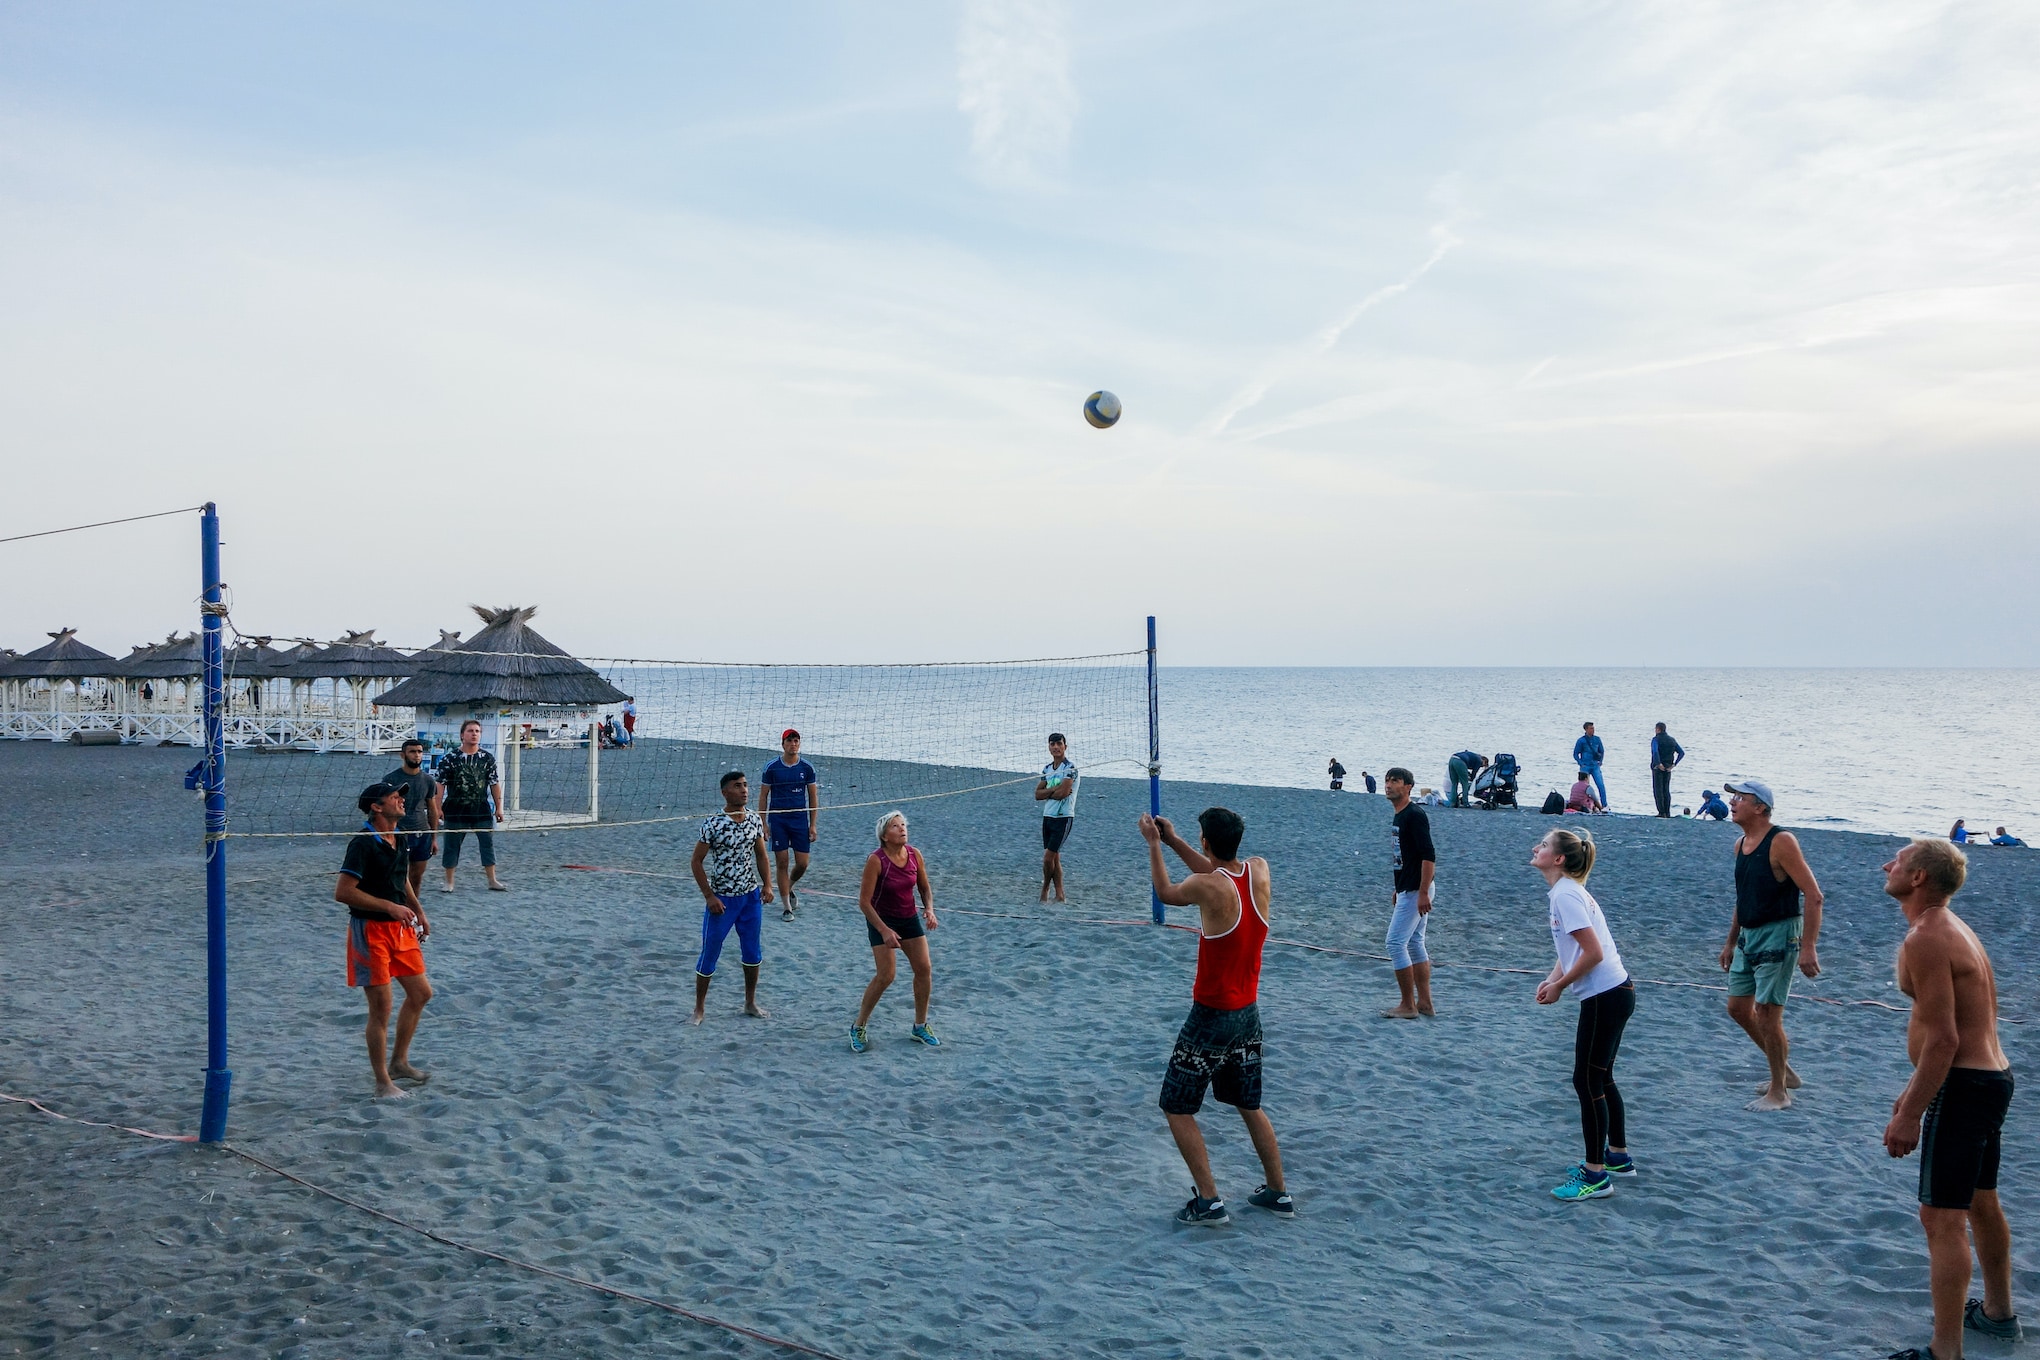 A volleyball with shoes? — Sochi, Russia